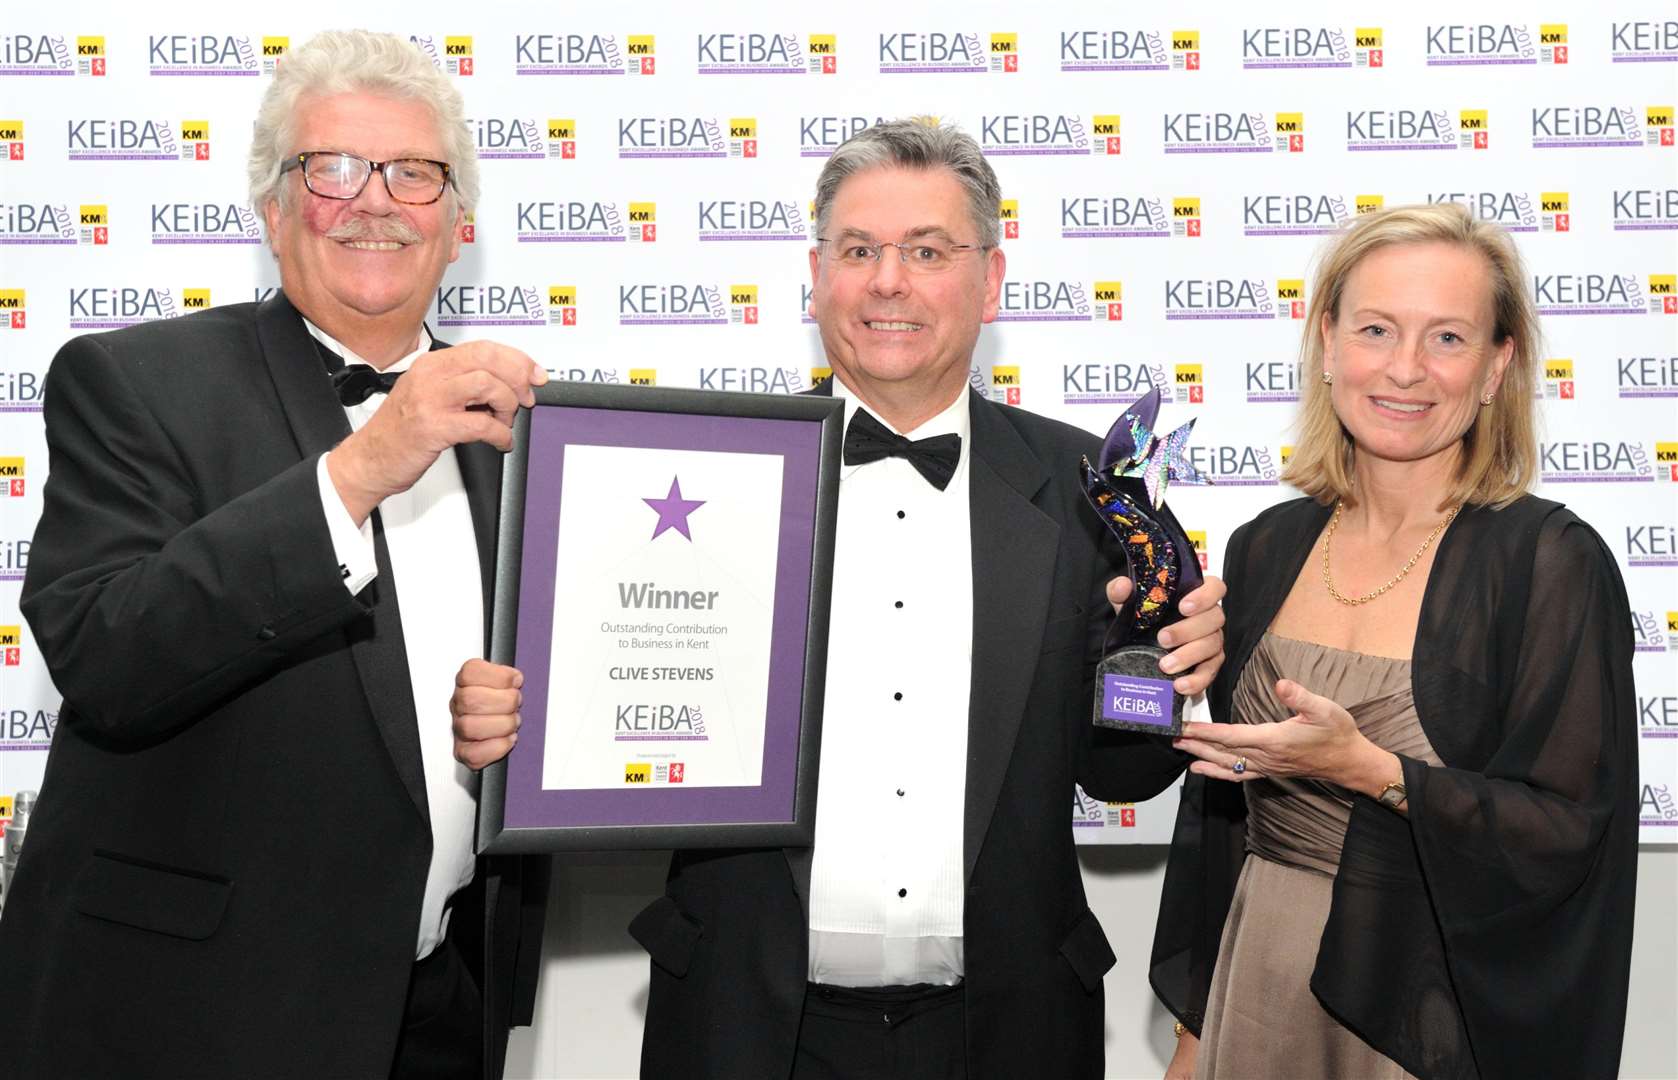 Mark Dance, left, and Geraldine Allinson present the 2018 KEiBA for Outstanding Contribution to Business to Clive Stevens of Kreston Reeves